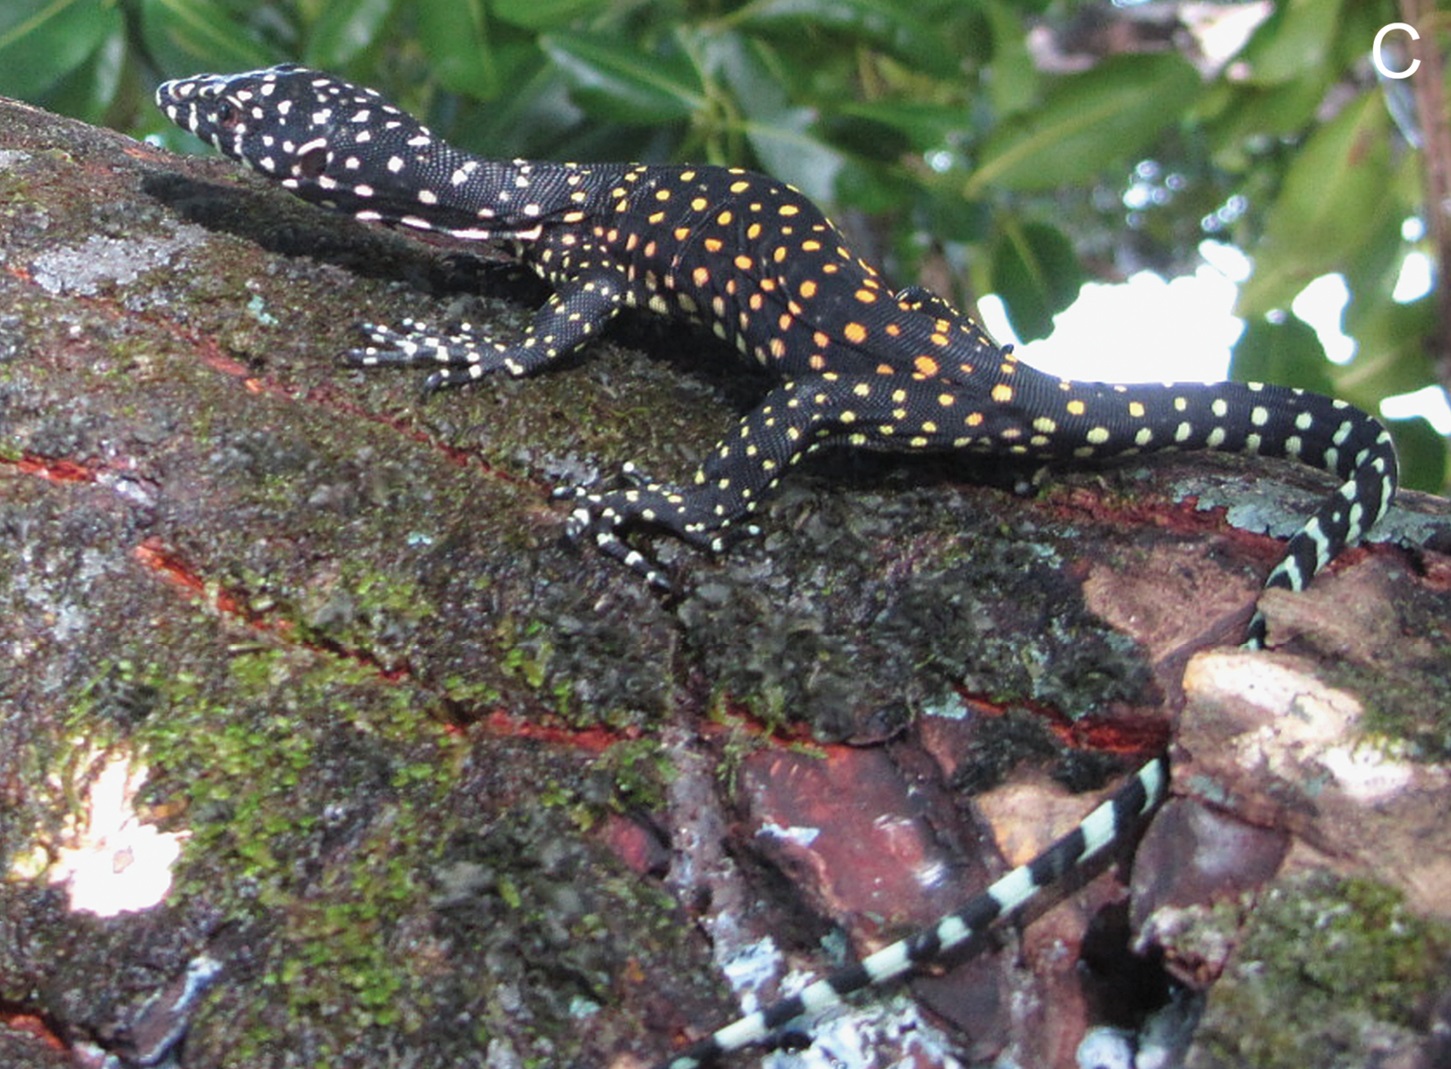 Meet The Million-Year-Old Lizard Species We Didn’t Know Existed Until Now